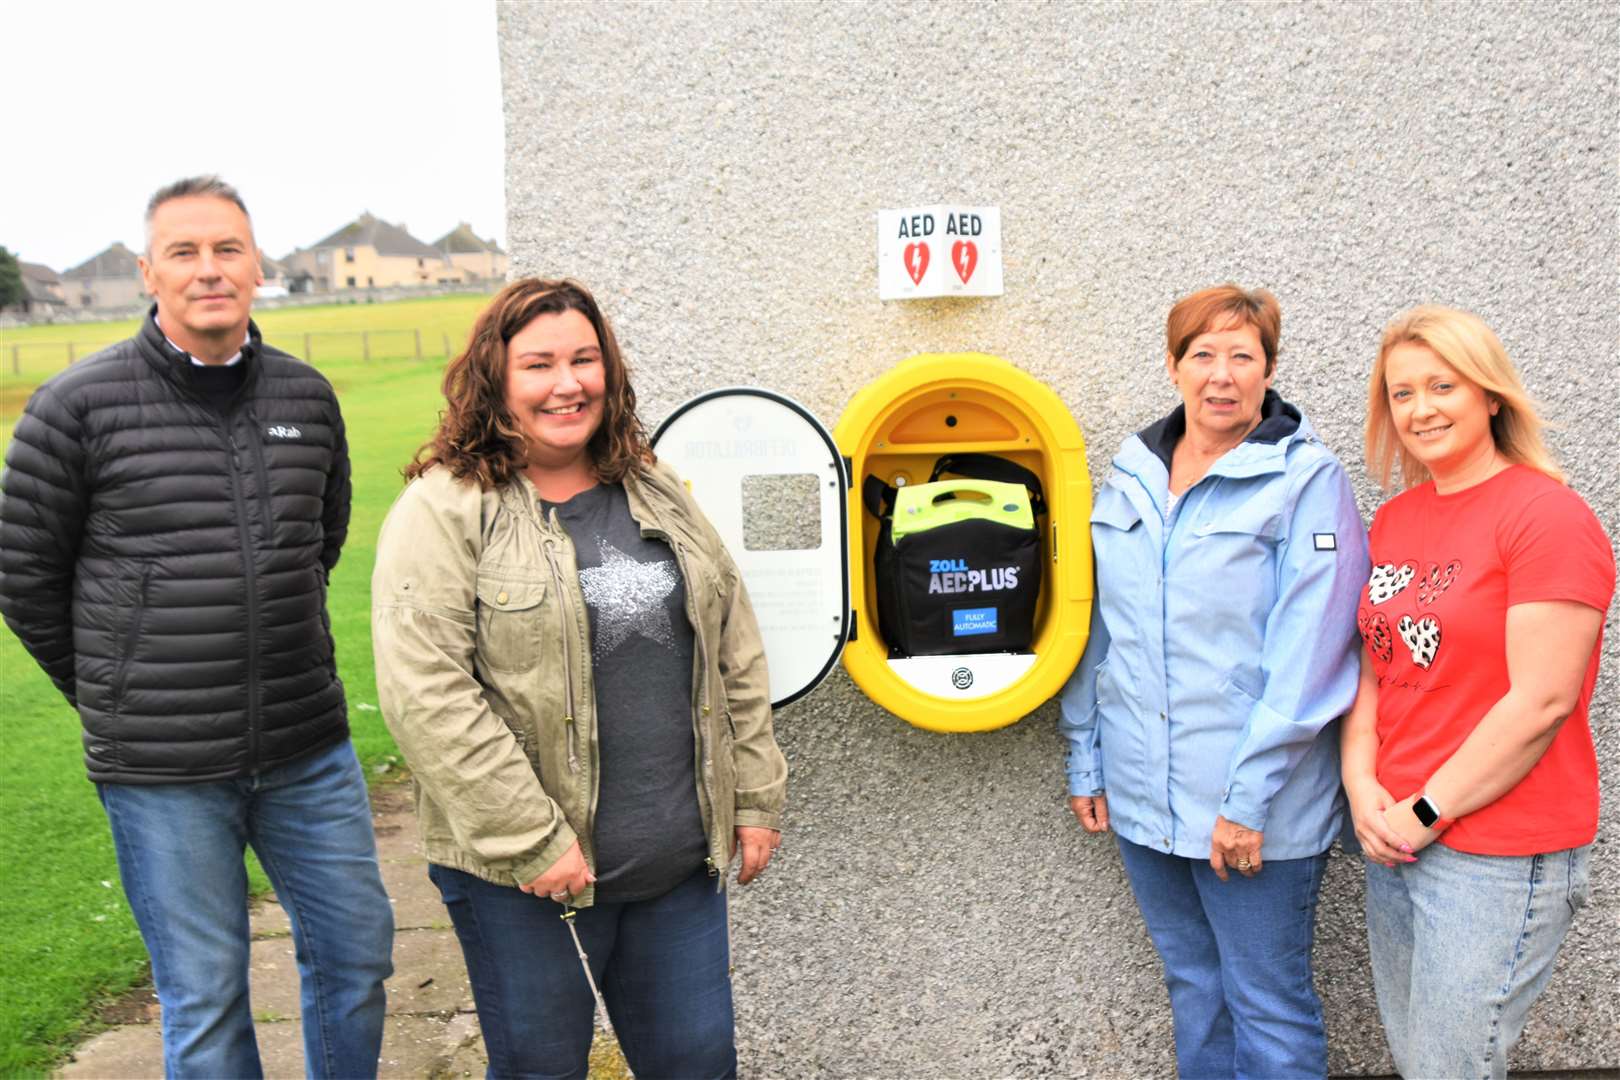 The defibrillator was installed at the Upper Bignold Park, Wick.